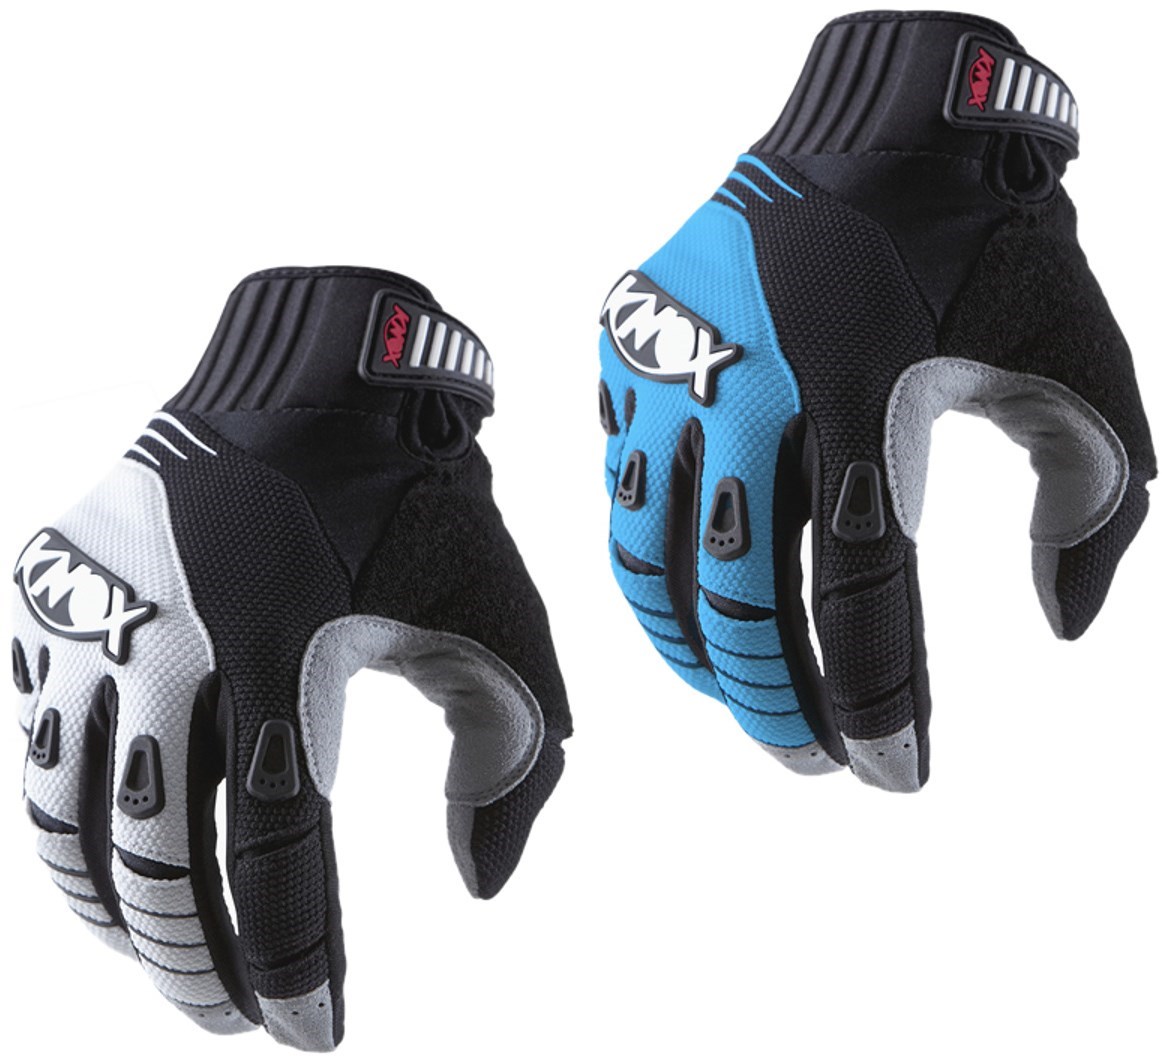 Knox Oryx OR2 Glove product image